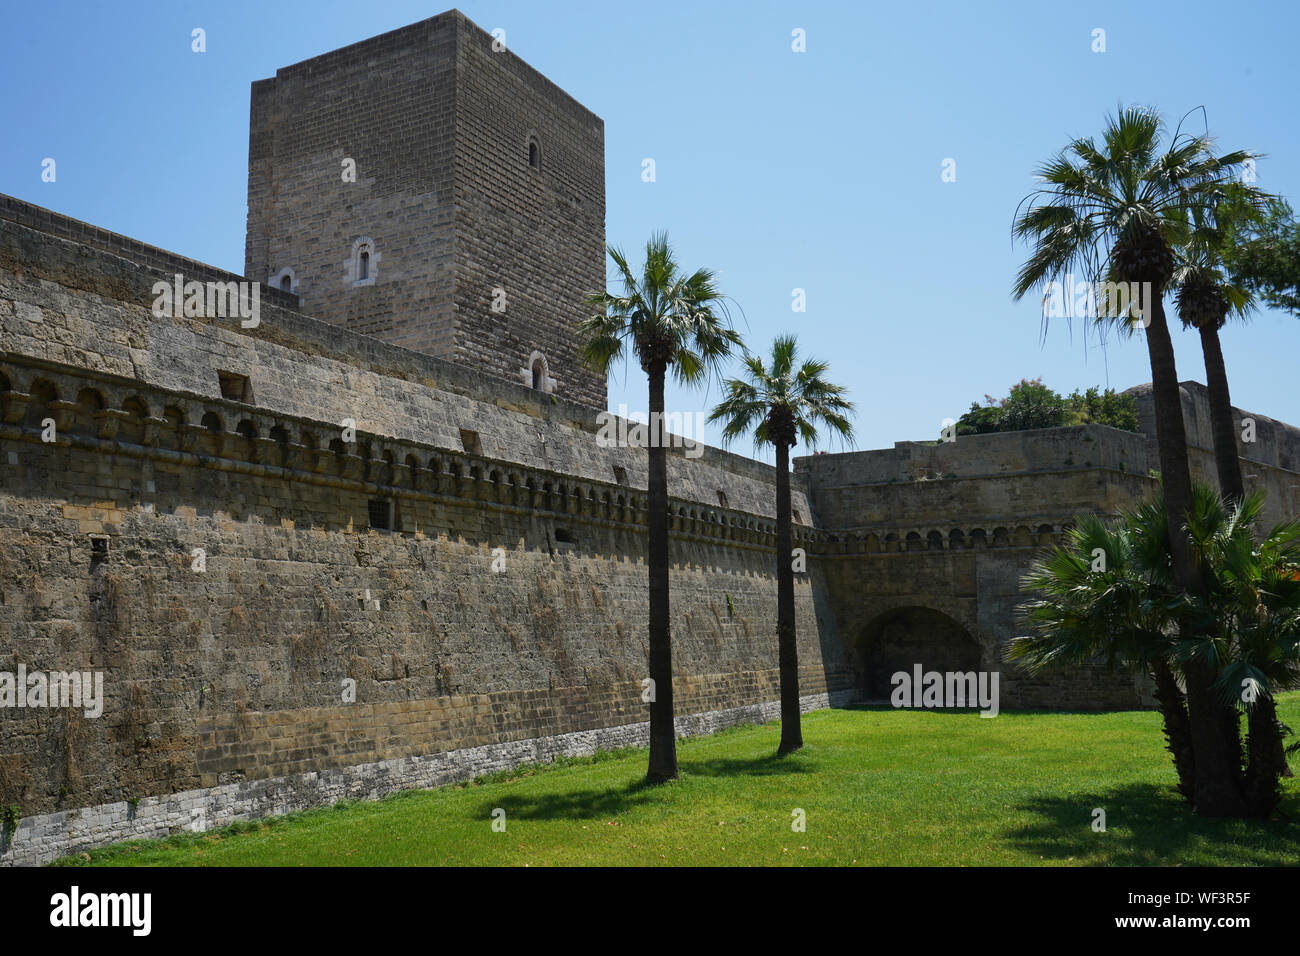 Exterior wall and fortifications of the Swabian Castle, Bari, Puglia, Italy. This Norman-Hoehnstaufen castle was built around 1131 Stock Photo